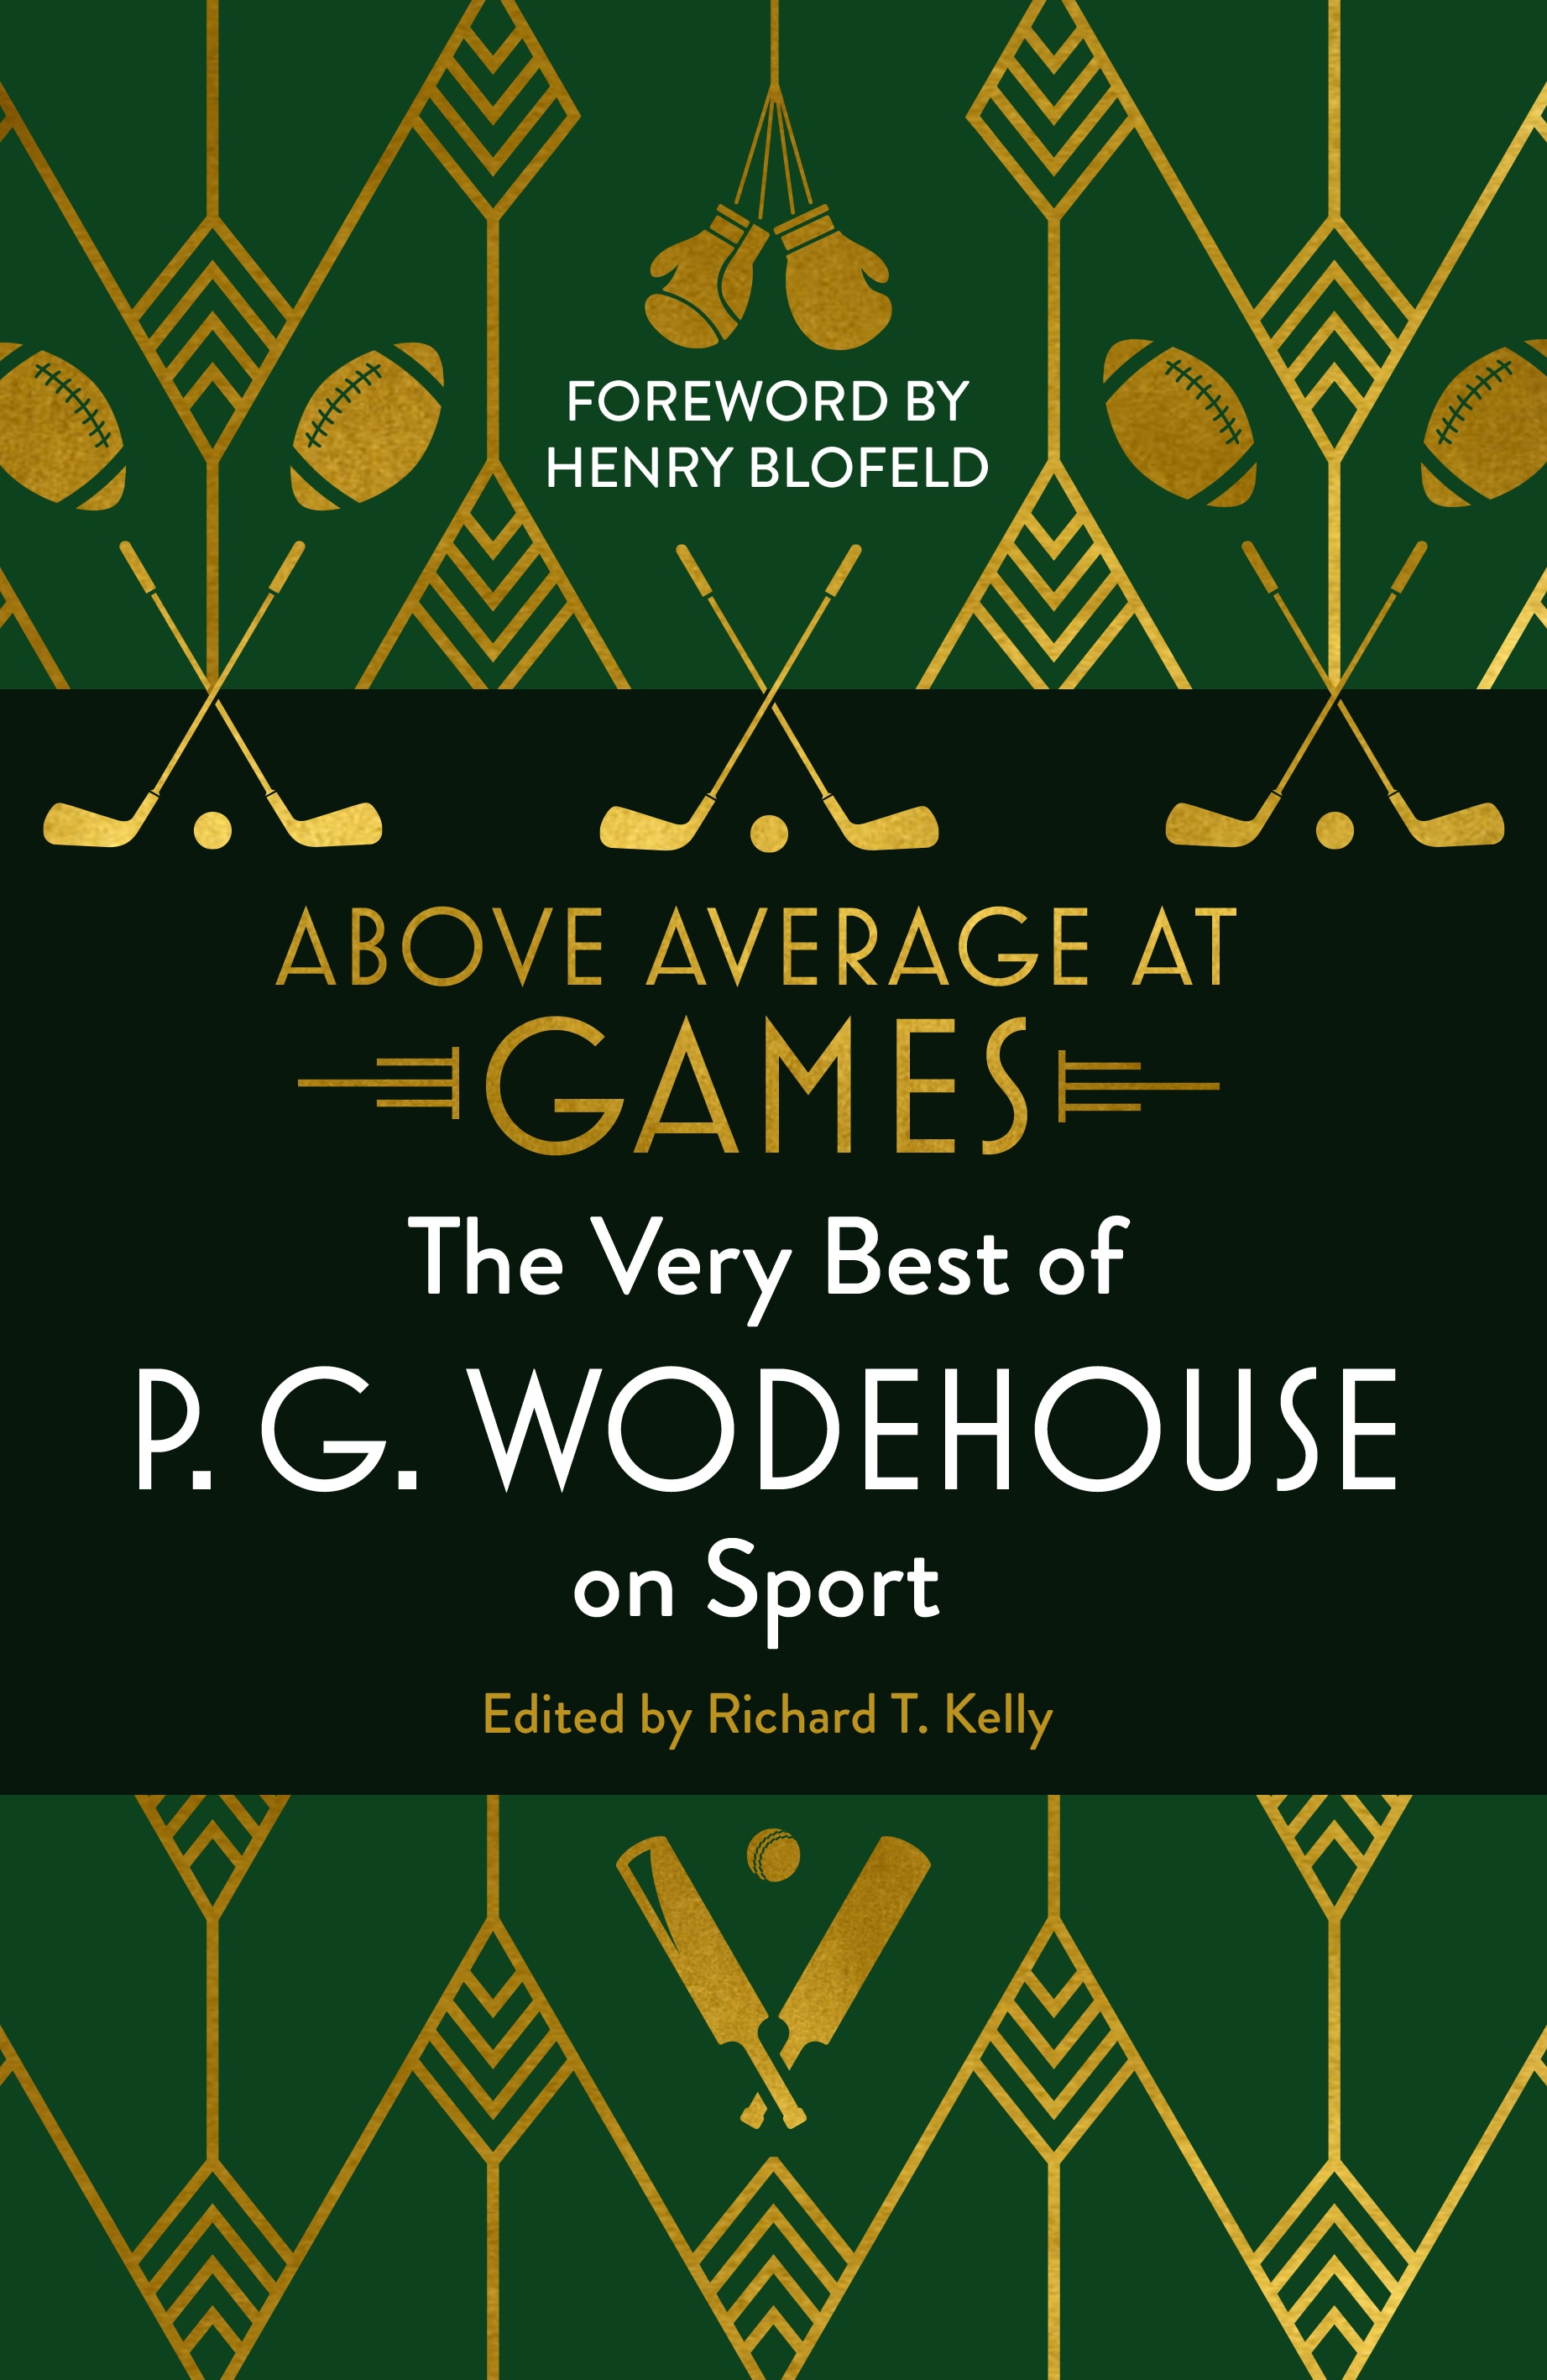 Book “Above Average at Games” by P.G. Wodehouse — October 31, 2019